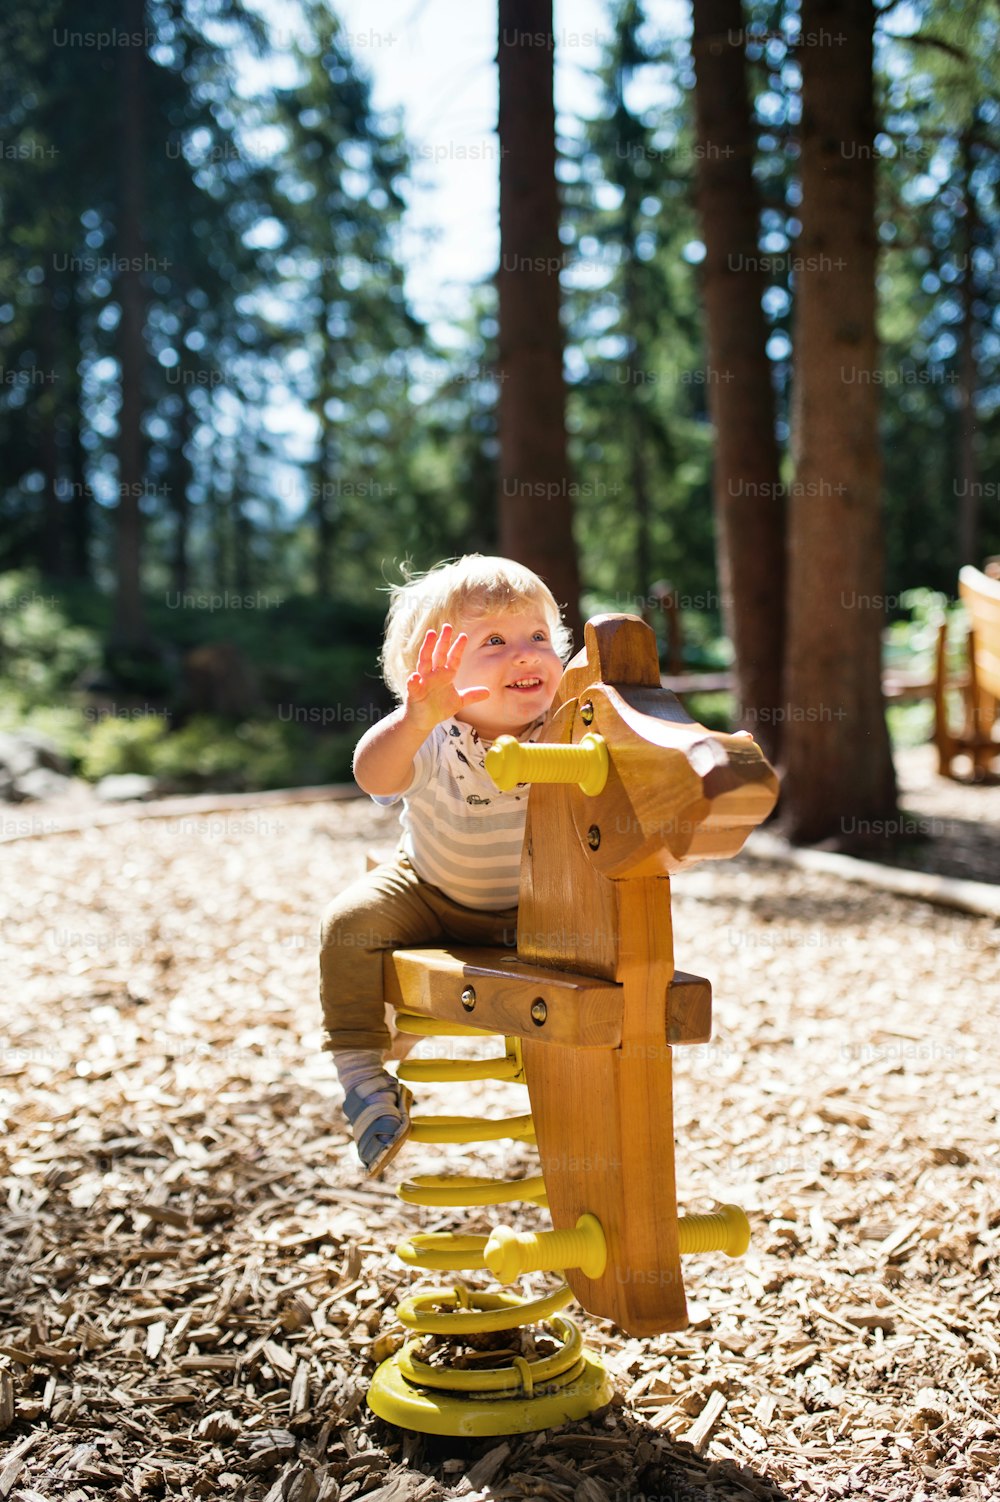 Happy, cute little boy on the playground. A toddler on a wooden rocking horse.